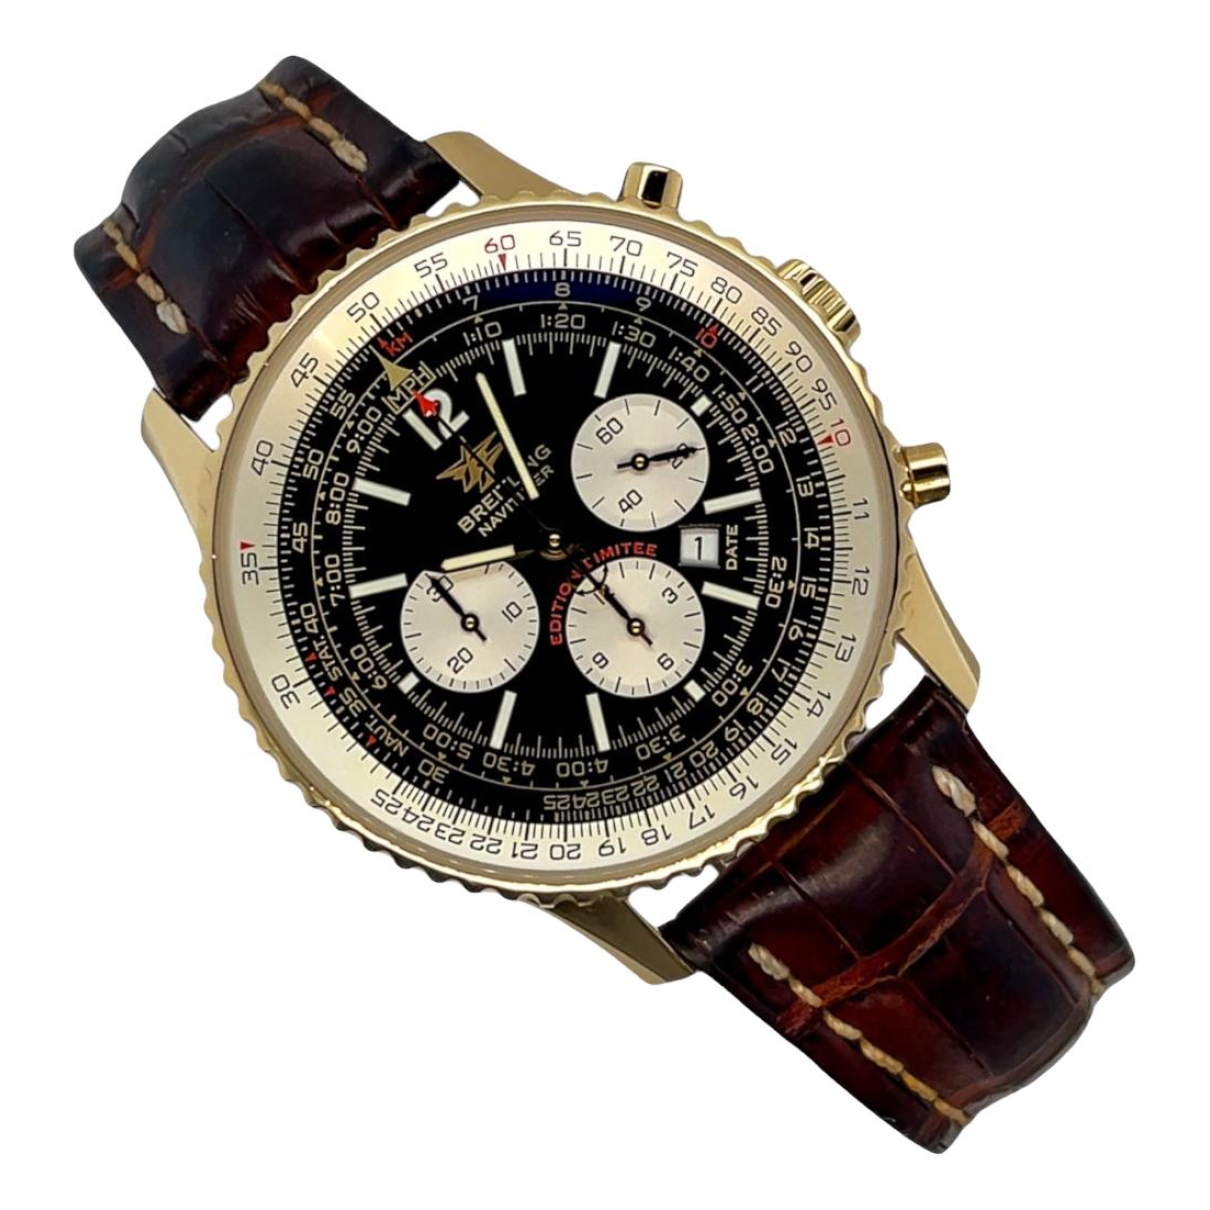 image of Breitling Navitimer yellow gold watch